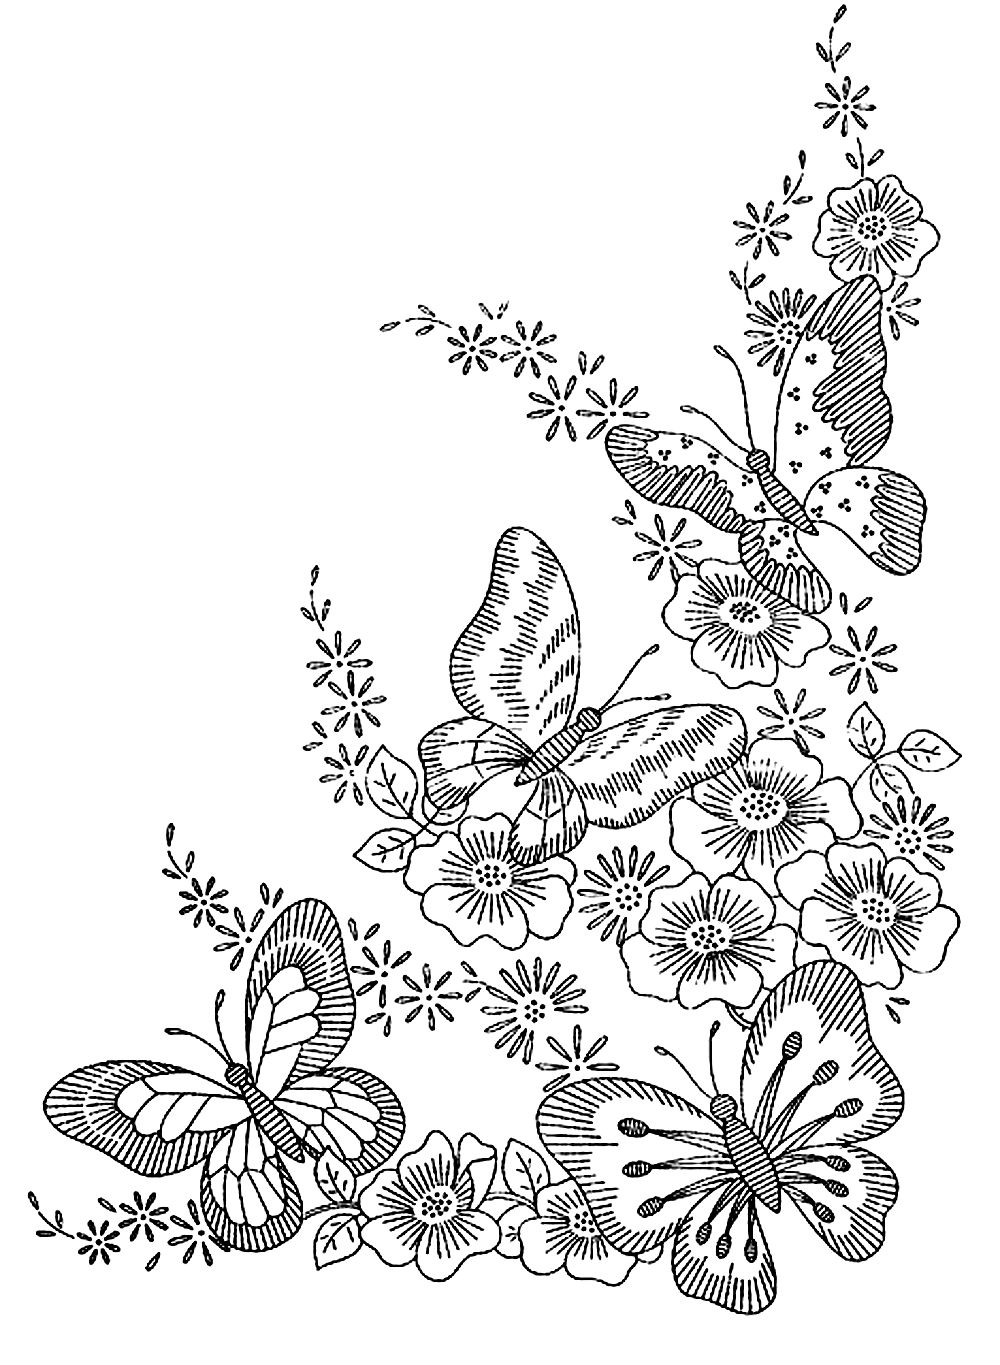 Butterflies - Butterflies & insects Adult Coloring Pages